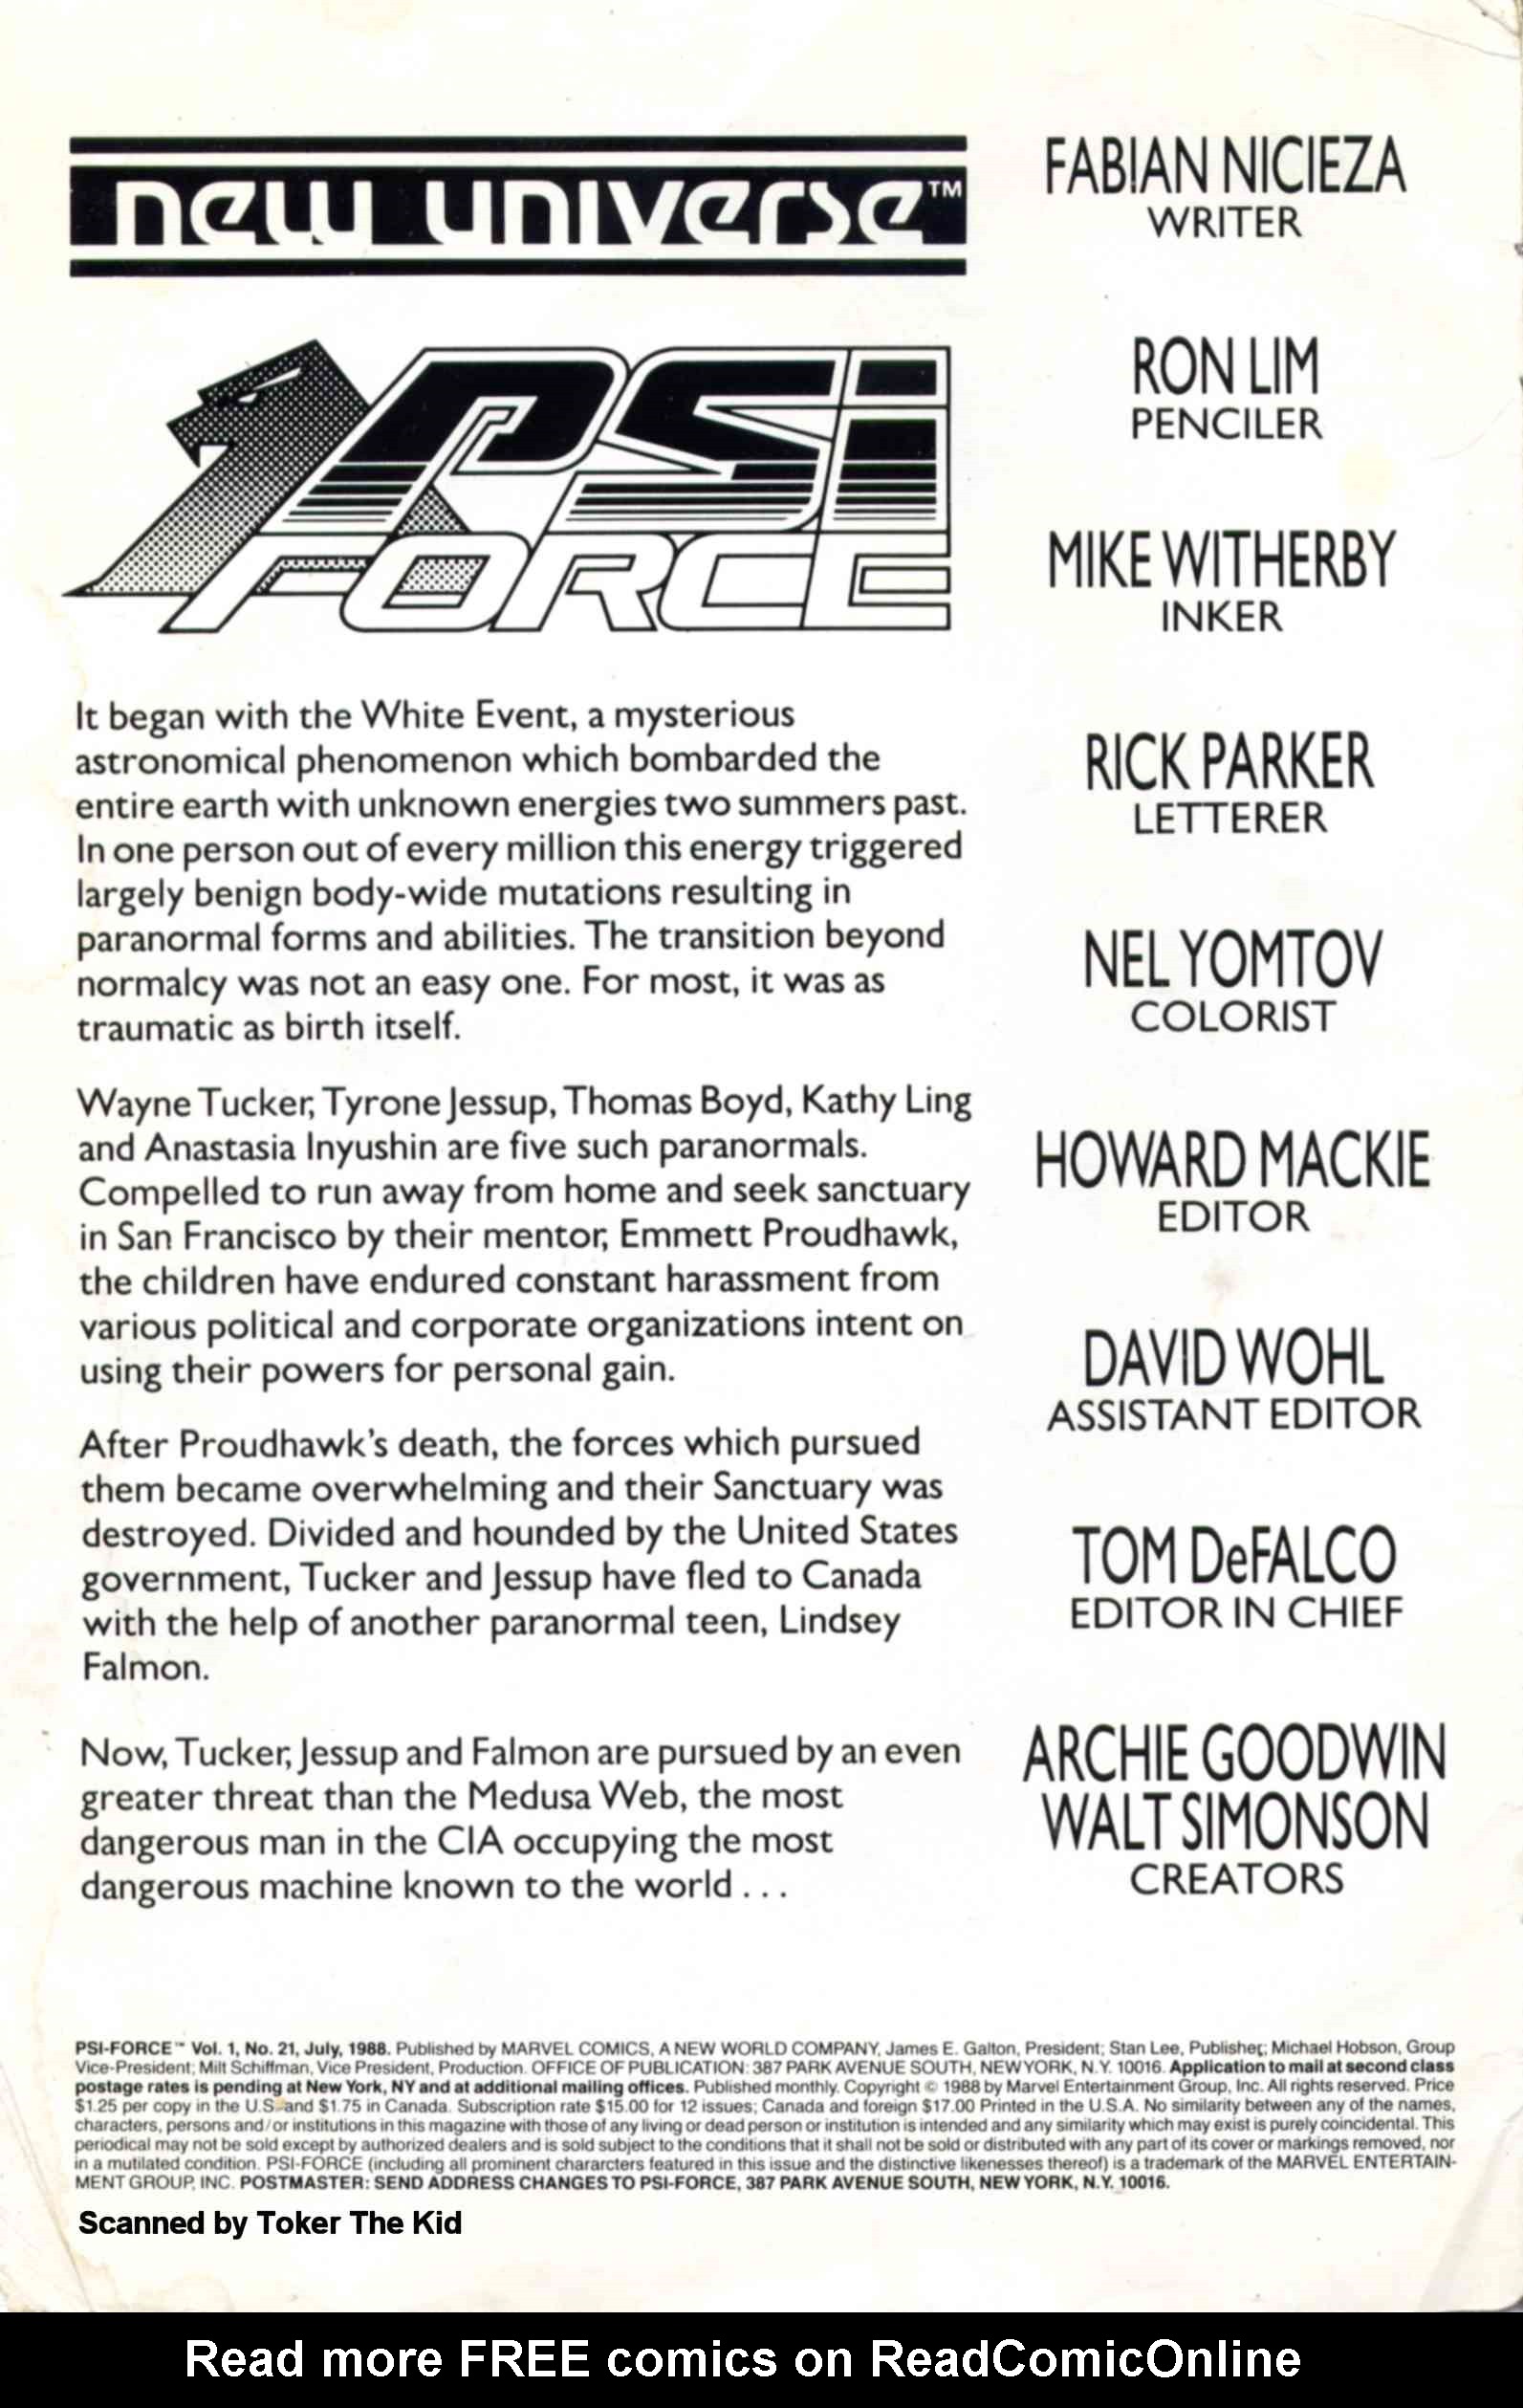 Read online Psi-Force comic -  Issue #21 - 2